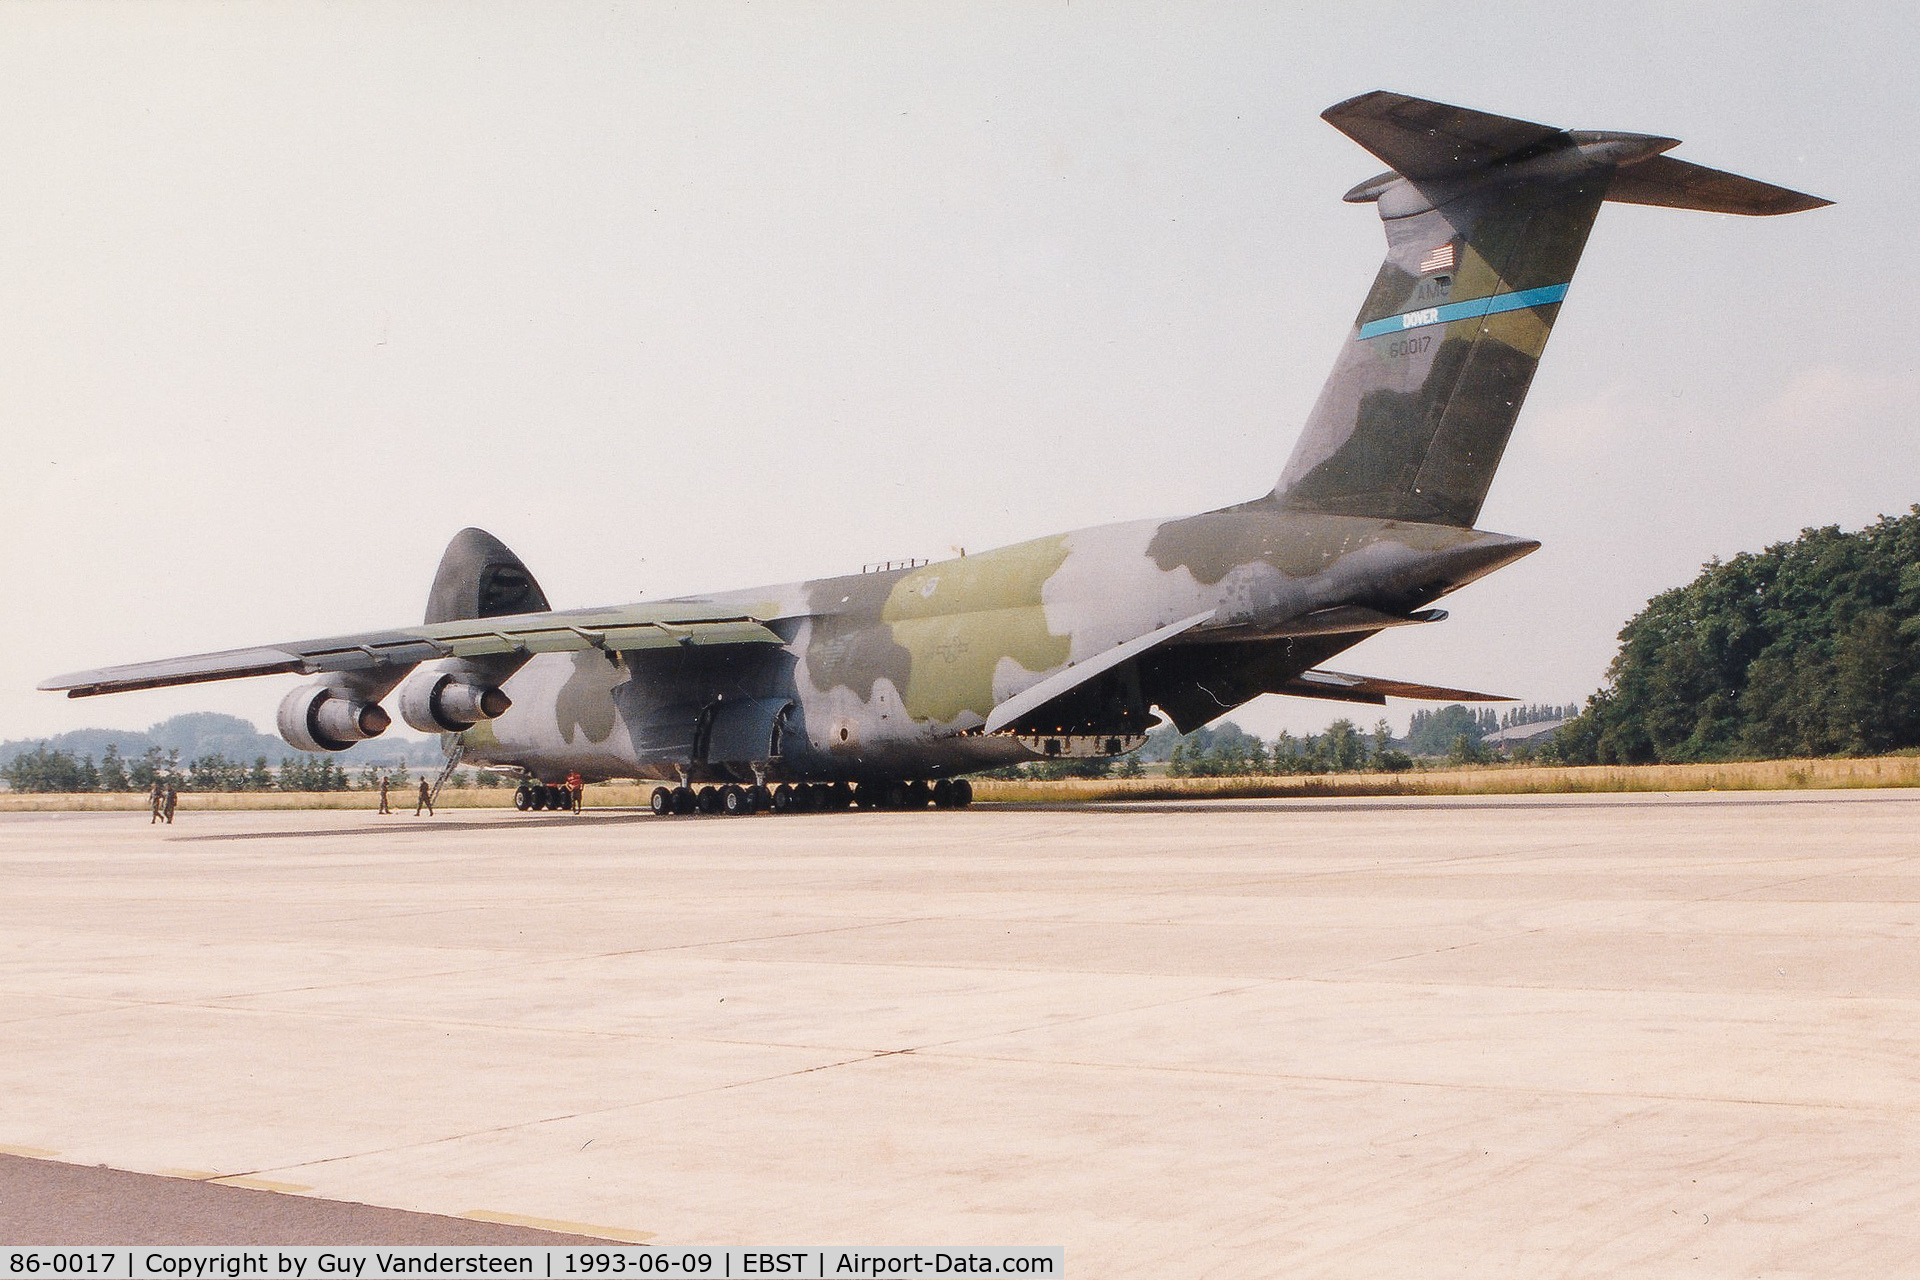 86-0017, 1986 Lockheed C-5B Galaxy C/N 500-0103, C-5B visiting EBST during Exercise Coronet Dart in support of South Dakota ANG